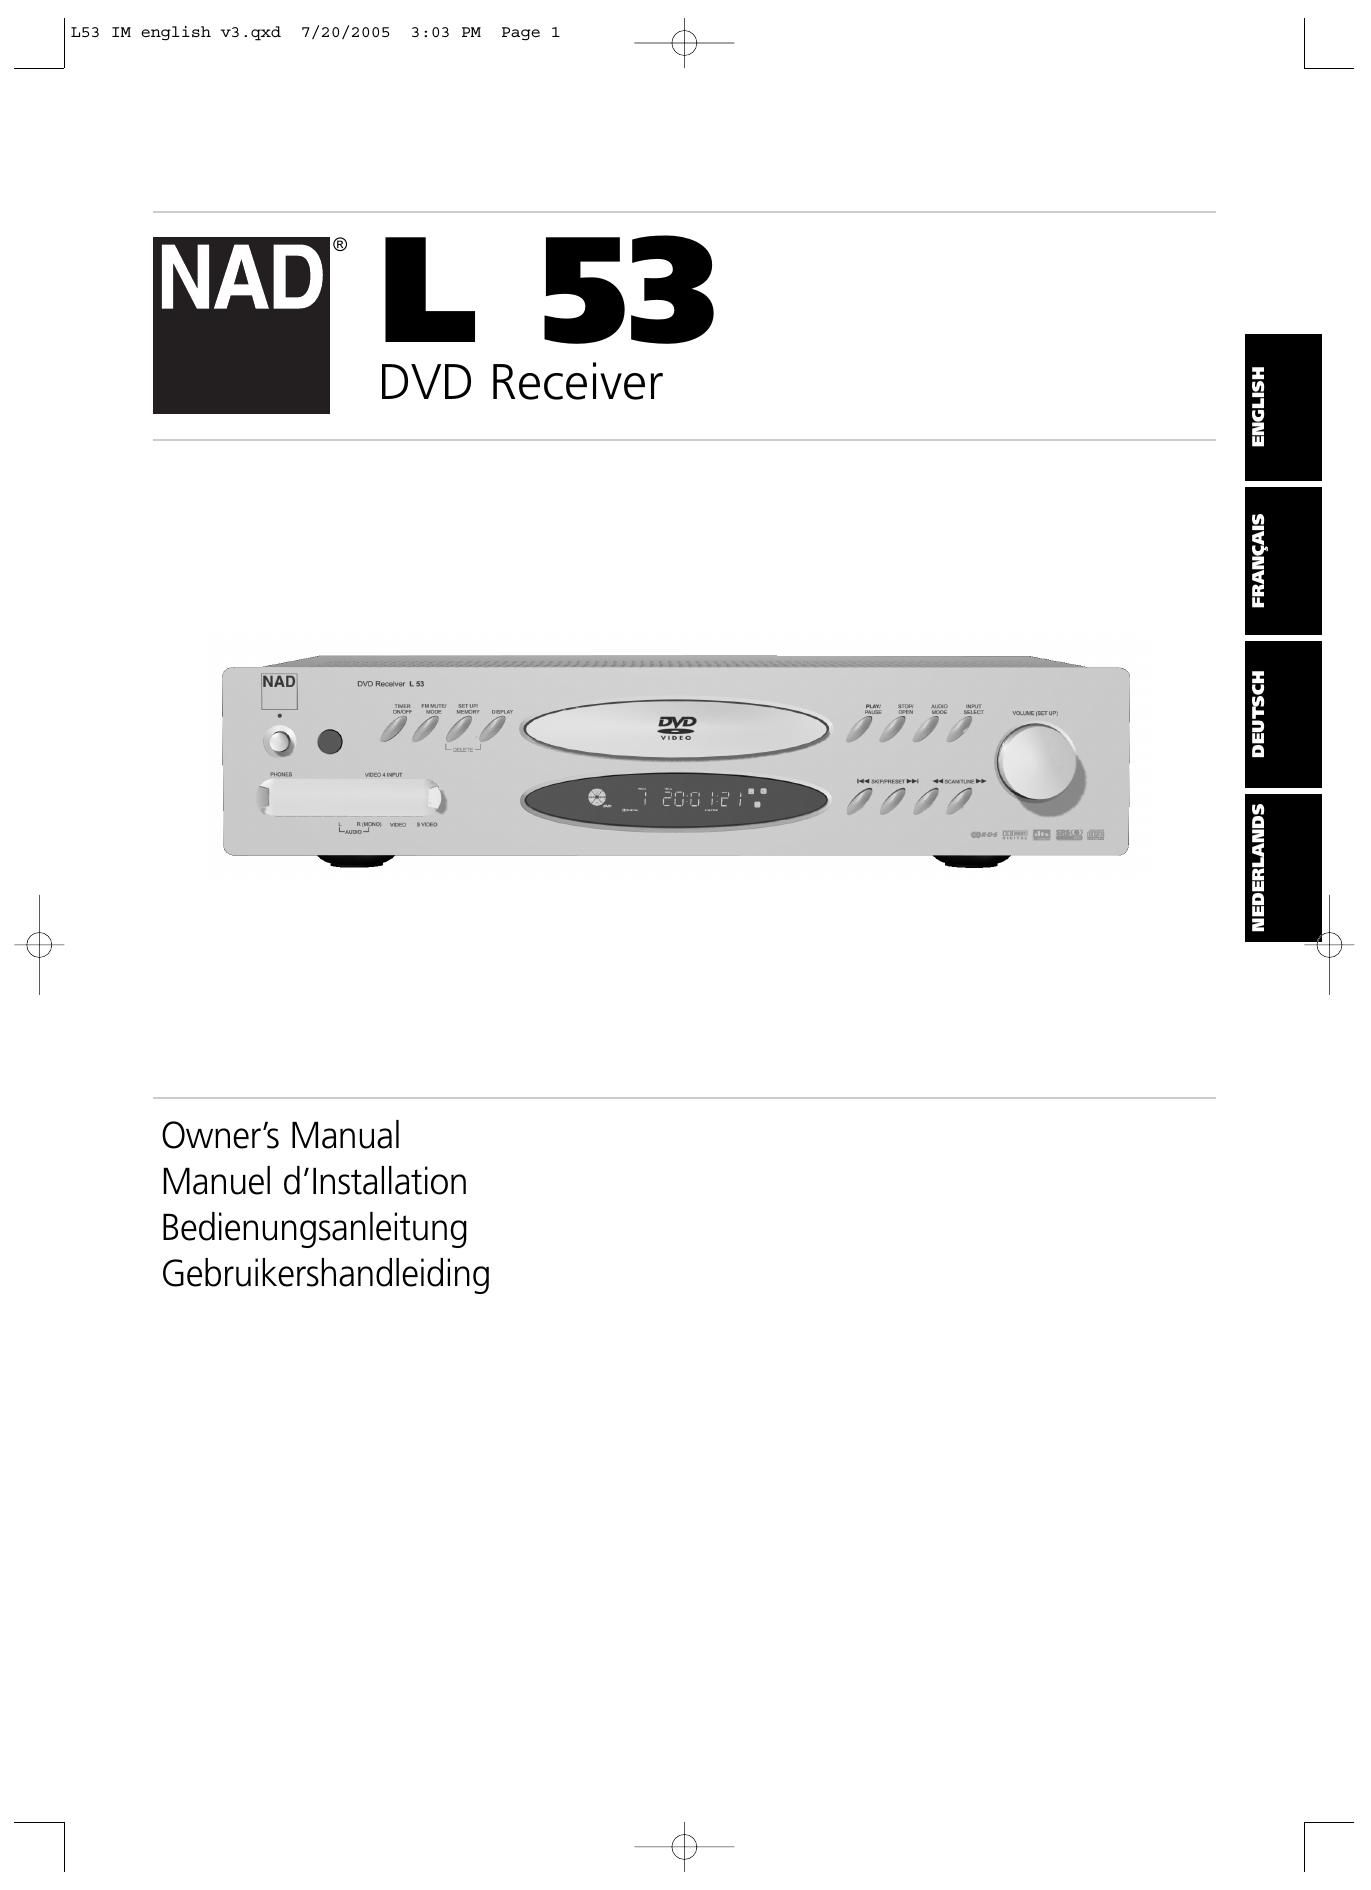 Nad L 53 Owners Manual